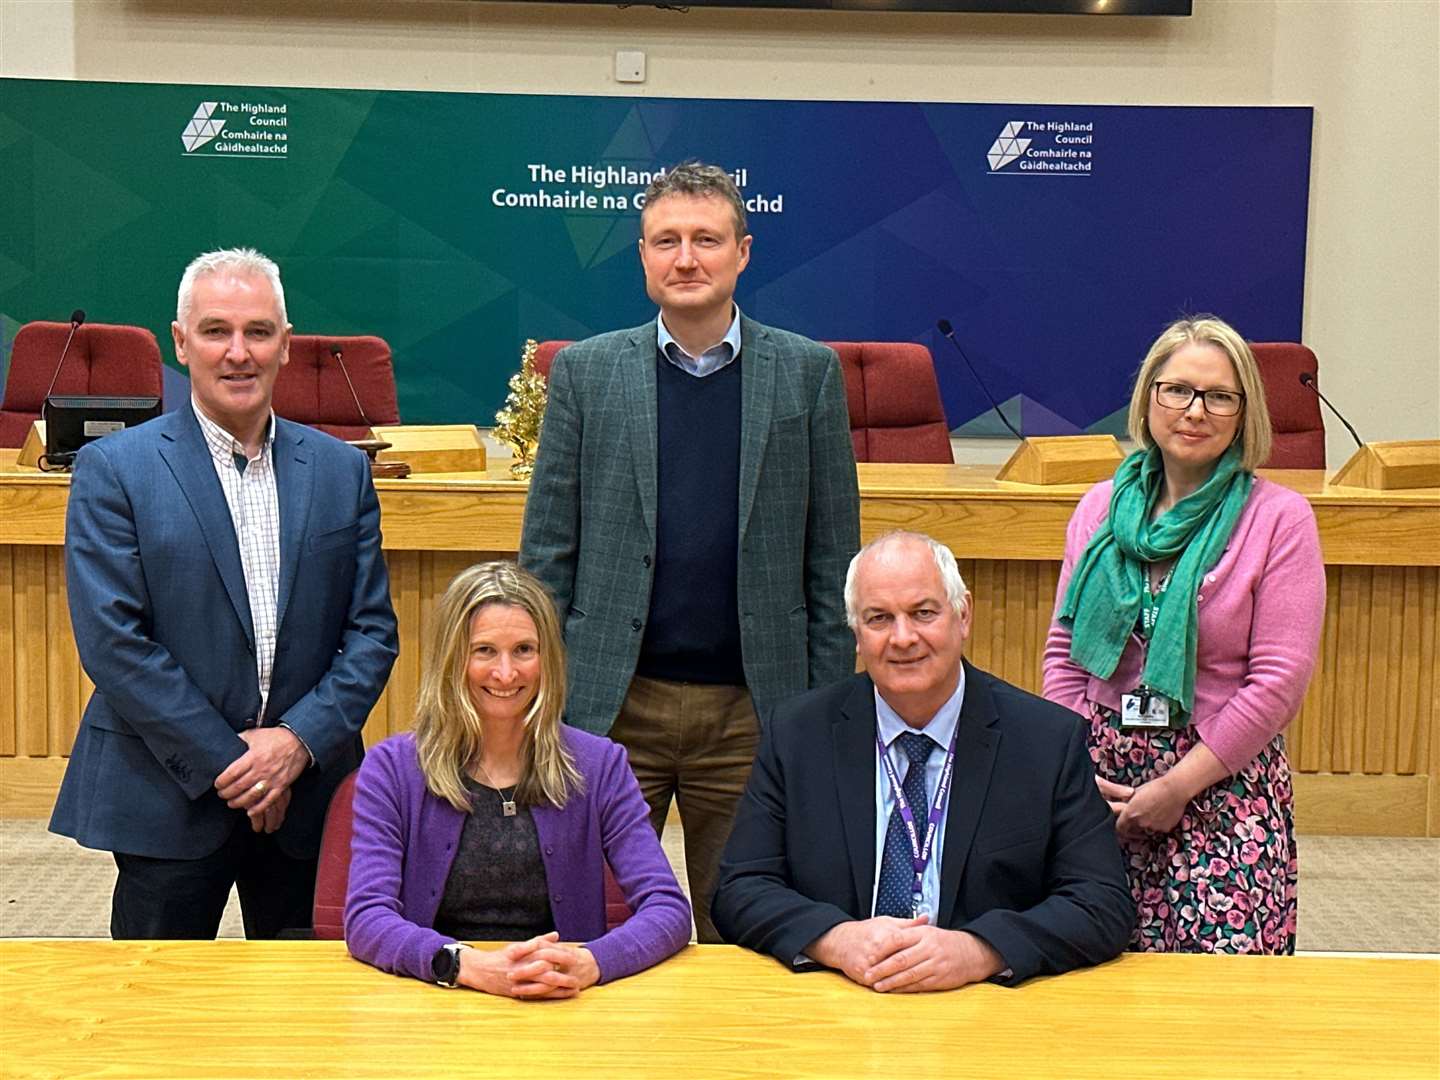 NatureScot CEO Francesca Osowska (front left) meets with Highland Council Leader, Cllr Raymond Bremner (front right) to mark the local authority’s signing of the Edinburgh Declaration. Also pictured (from left to right at the back) is Highland Council’s Climate Change Committee Chair Cllr Karl Rosie, NatureScot’s Director of Nature and Climate Change Nick Halfhide and Highland Council’s Acting Depute Chief Executive & Executive Chief Officer, Performance and Governance Kate Lackie.